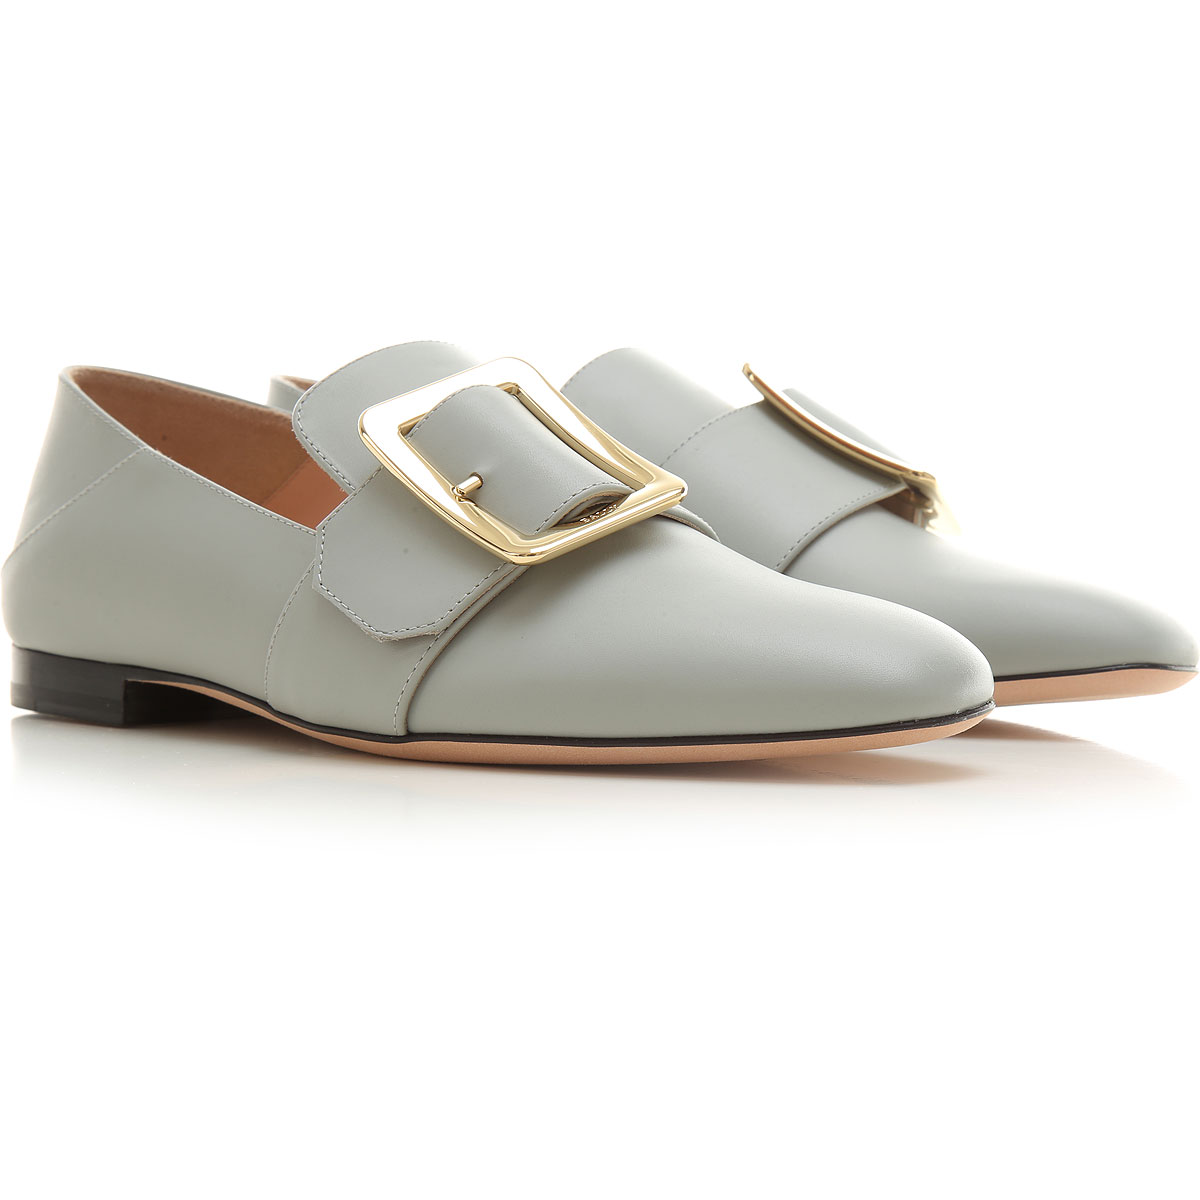 Womens Shoes Bally, Style code: 6237834-janelle-725